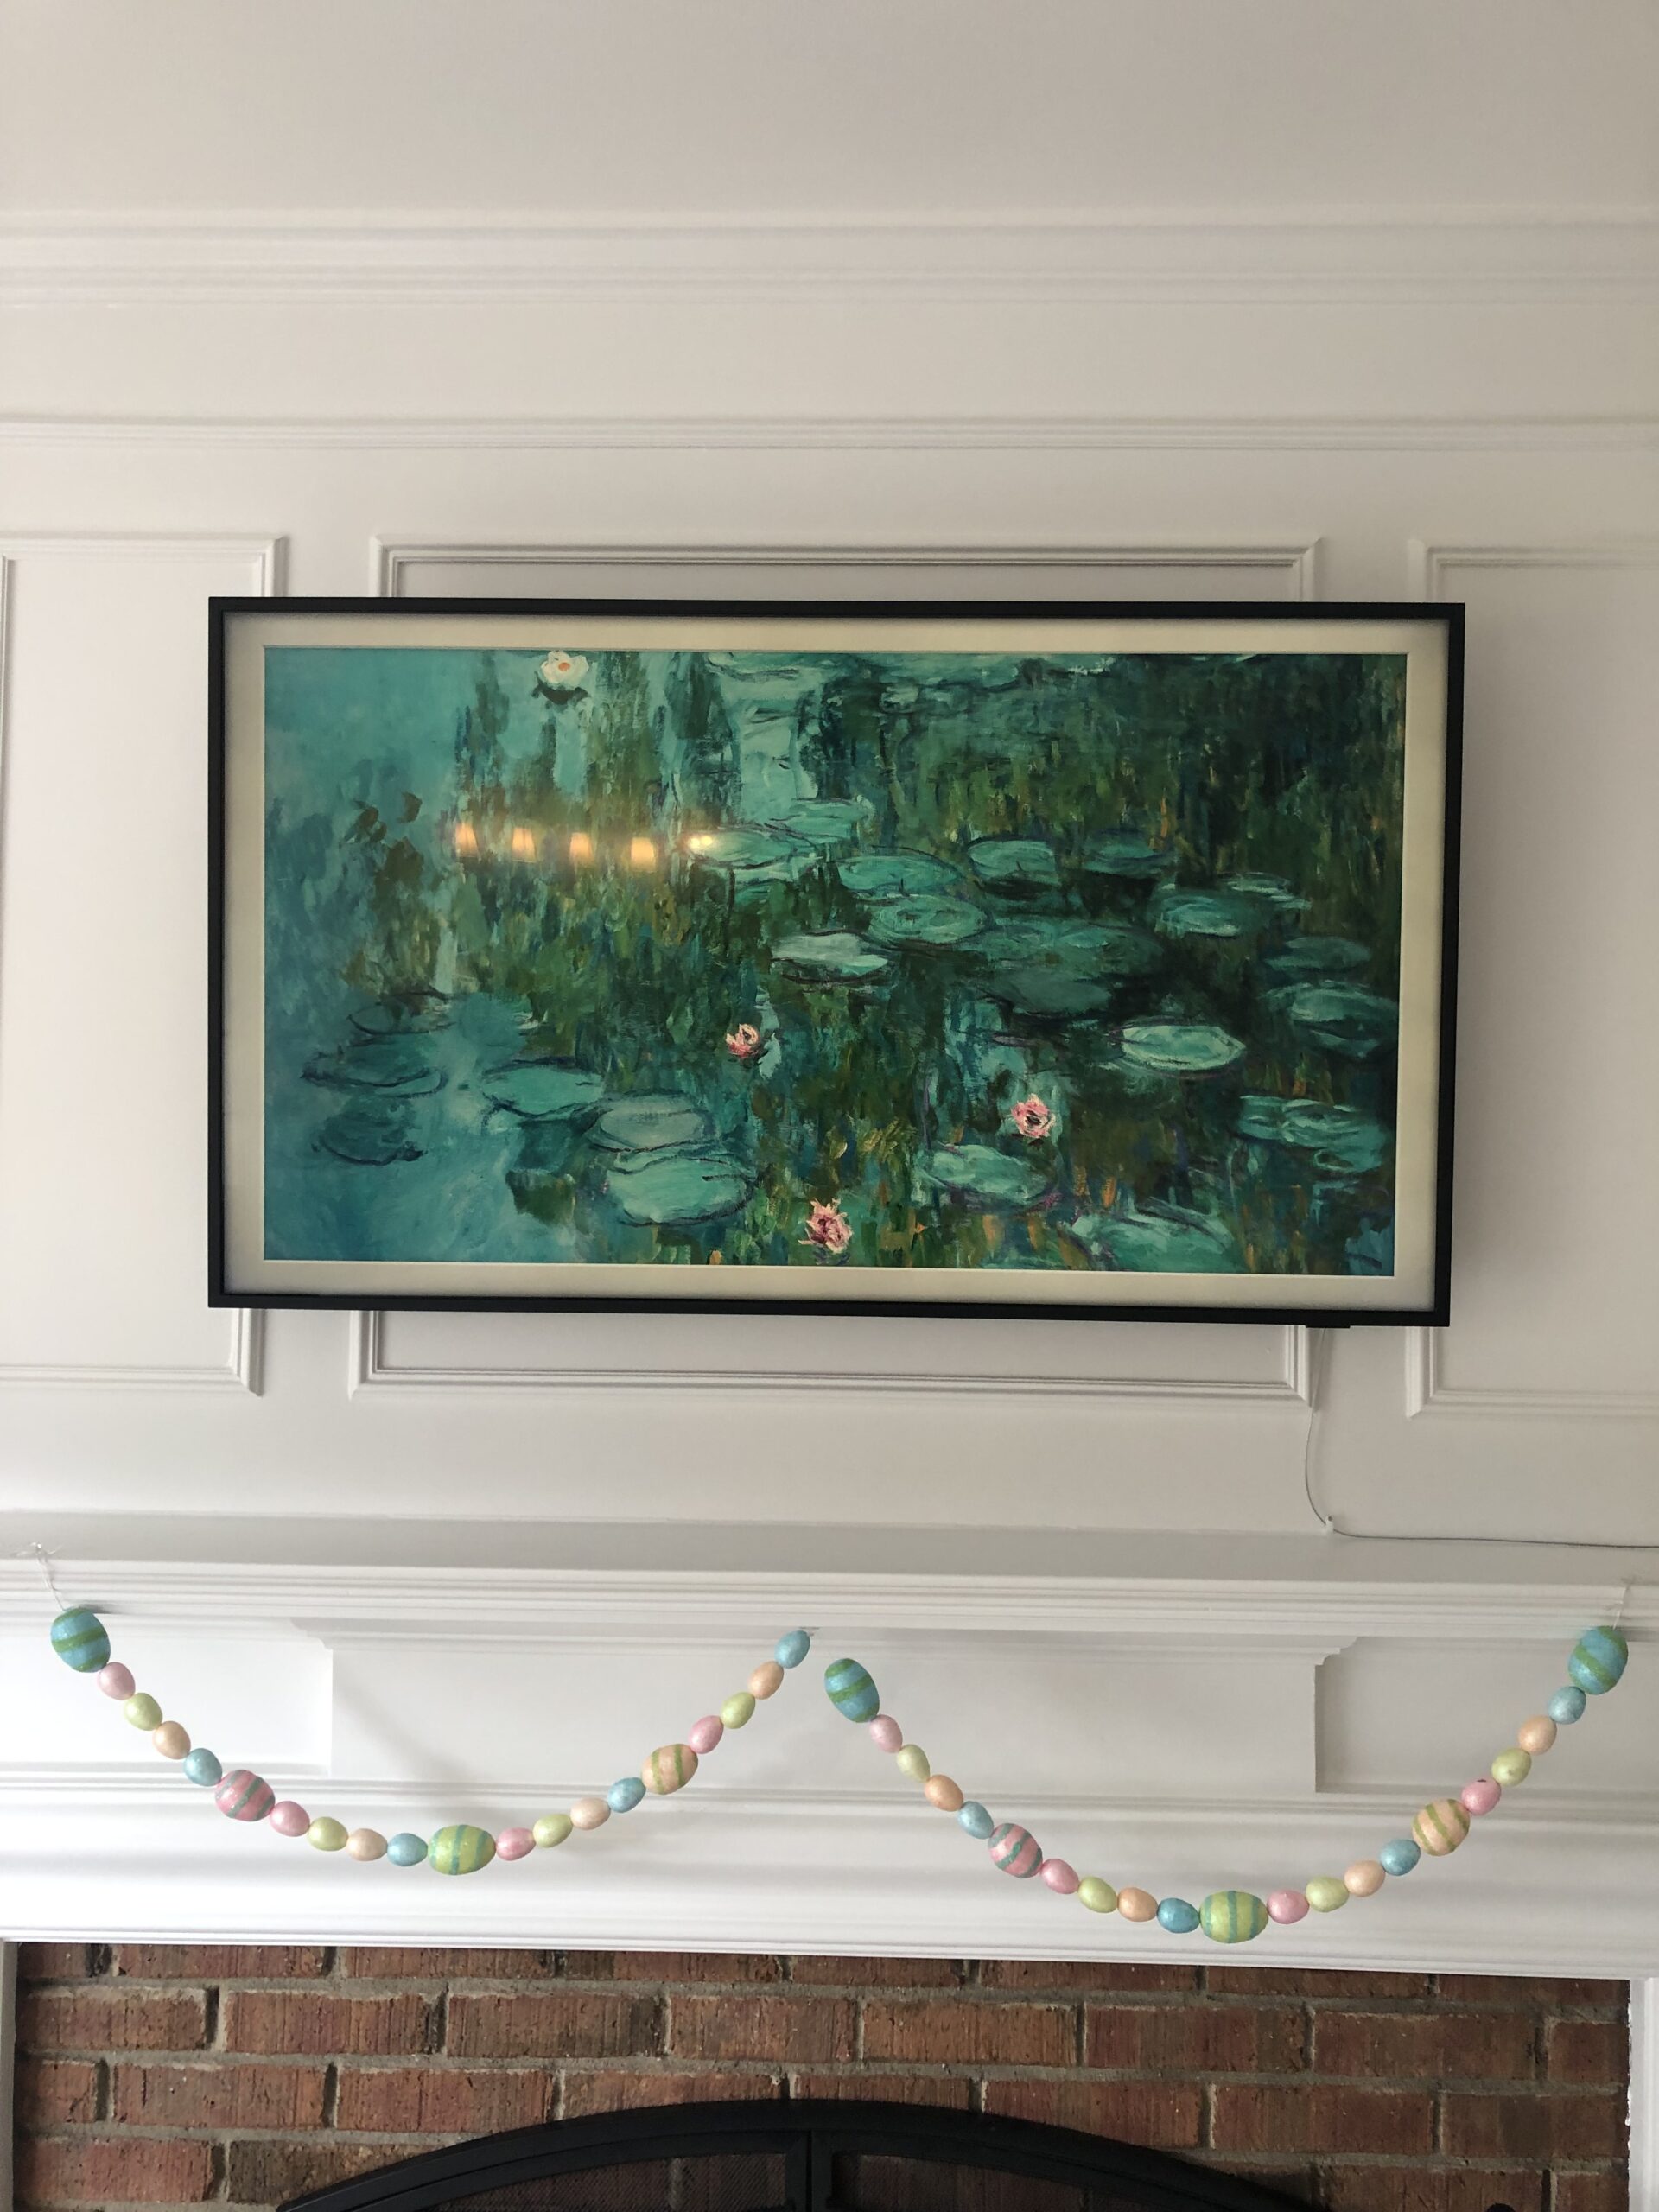 Samsung Frame TV mounted above a fireplace